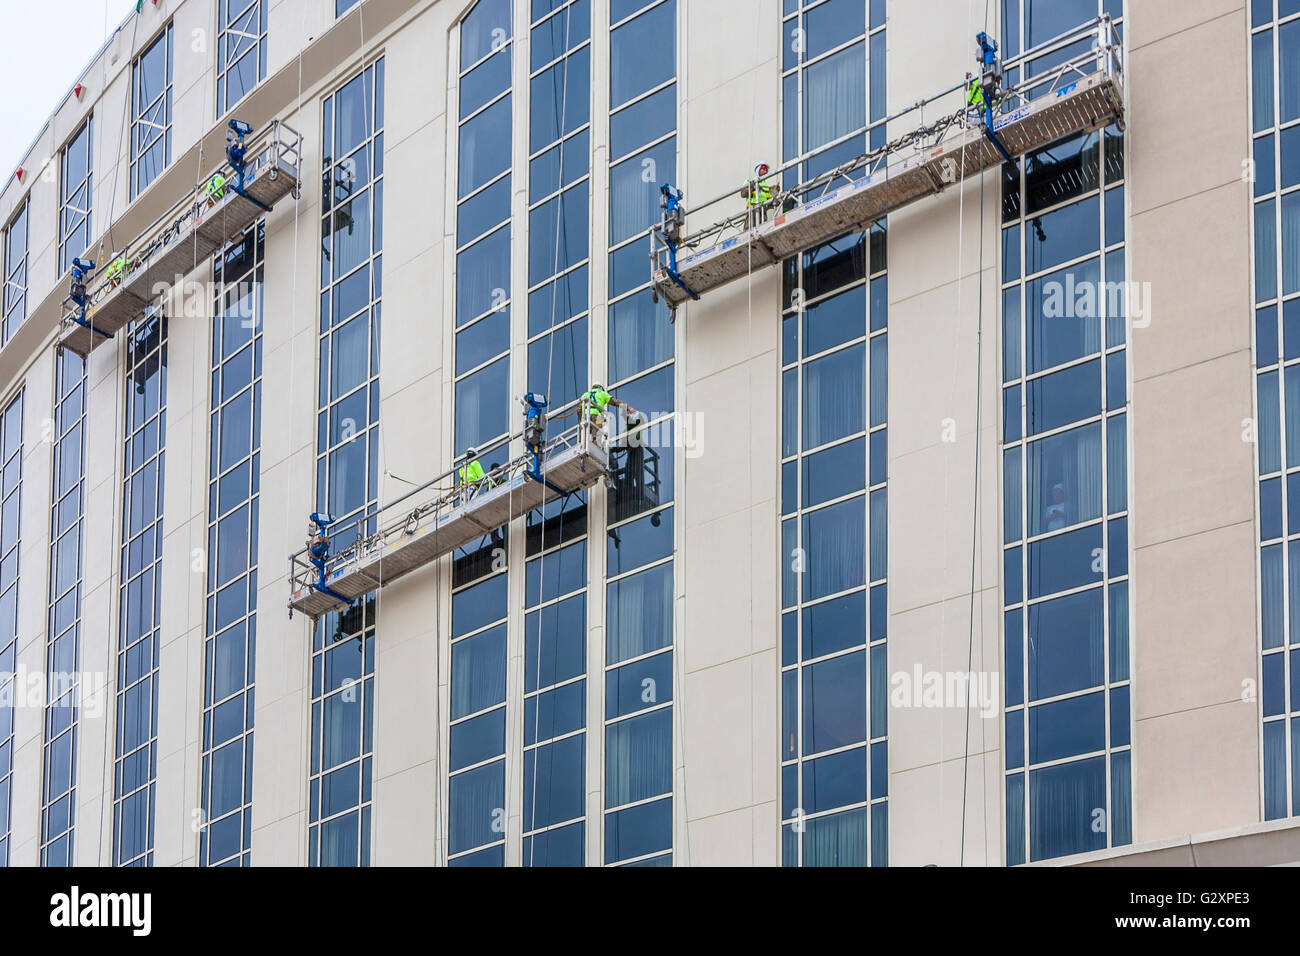 Window washers on electric scaffolding cleaning windows on high rise building in Nashville, Tennessee Stock Photo